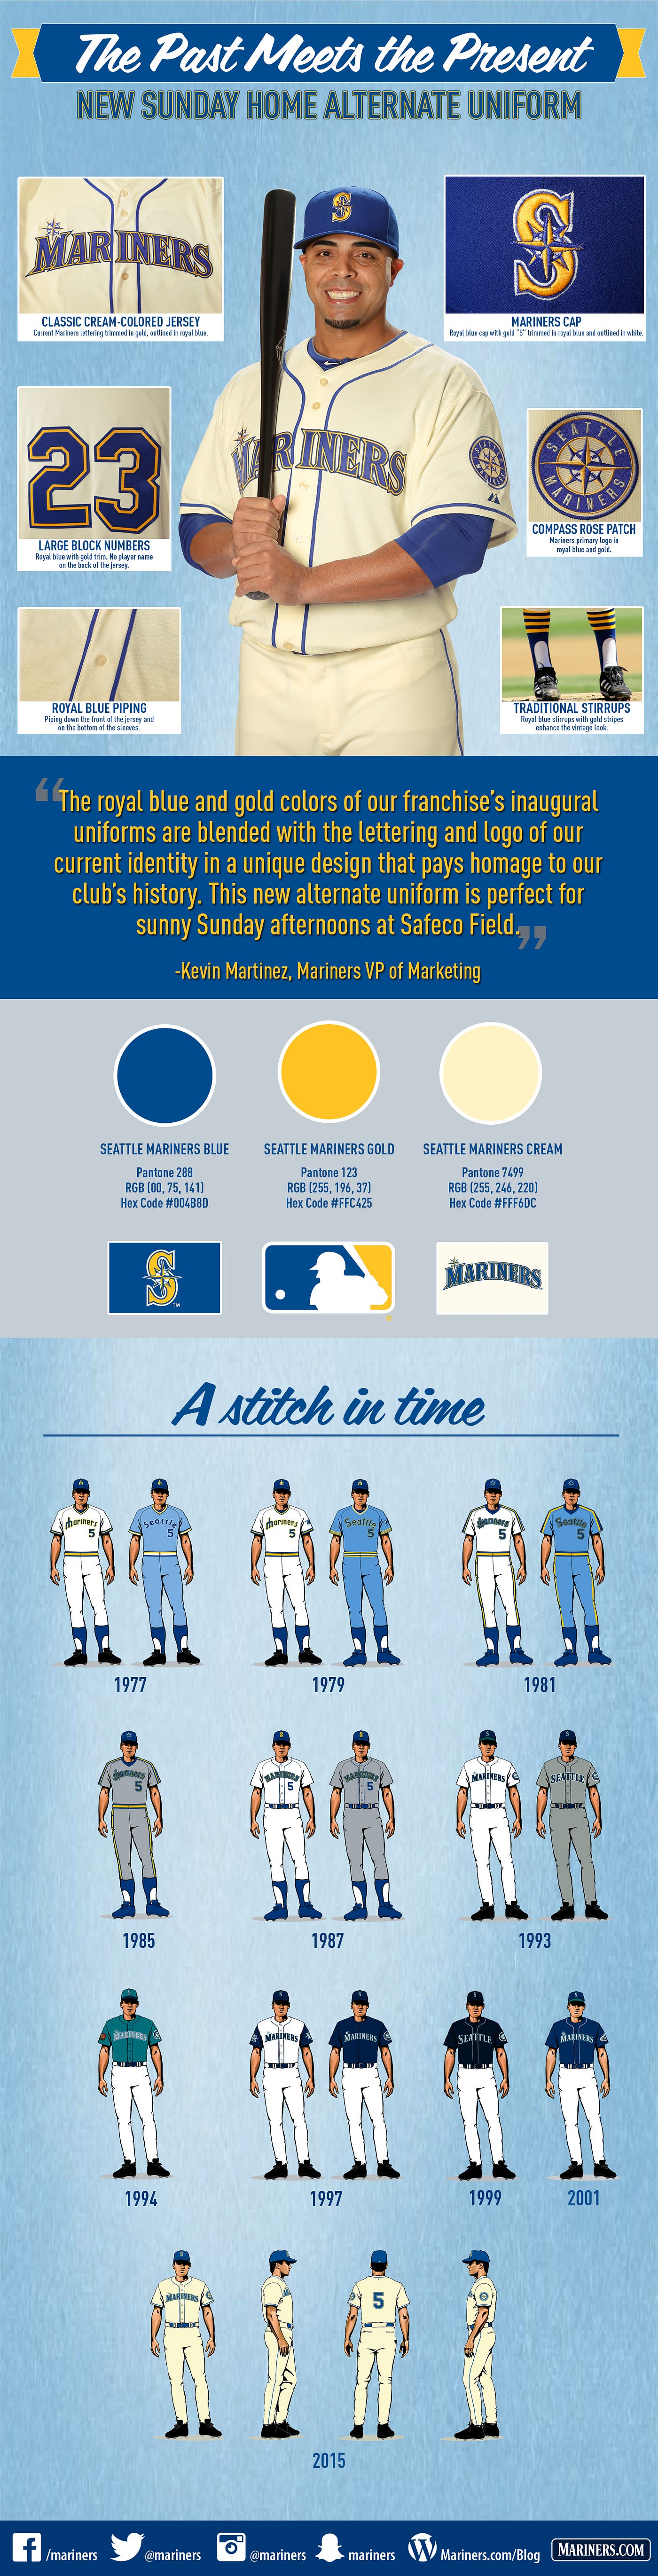 Mariners formally introduce new Sunday alternate uniforms - Lookout Landing